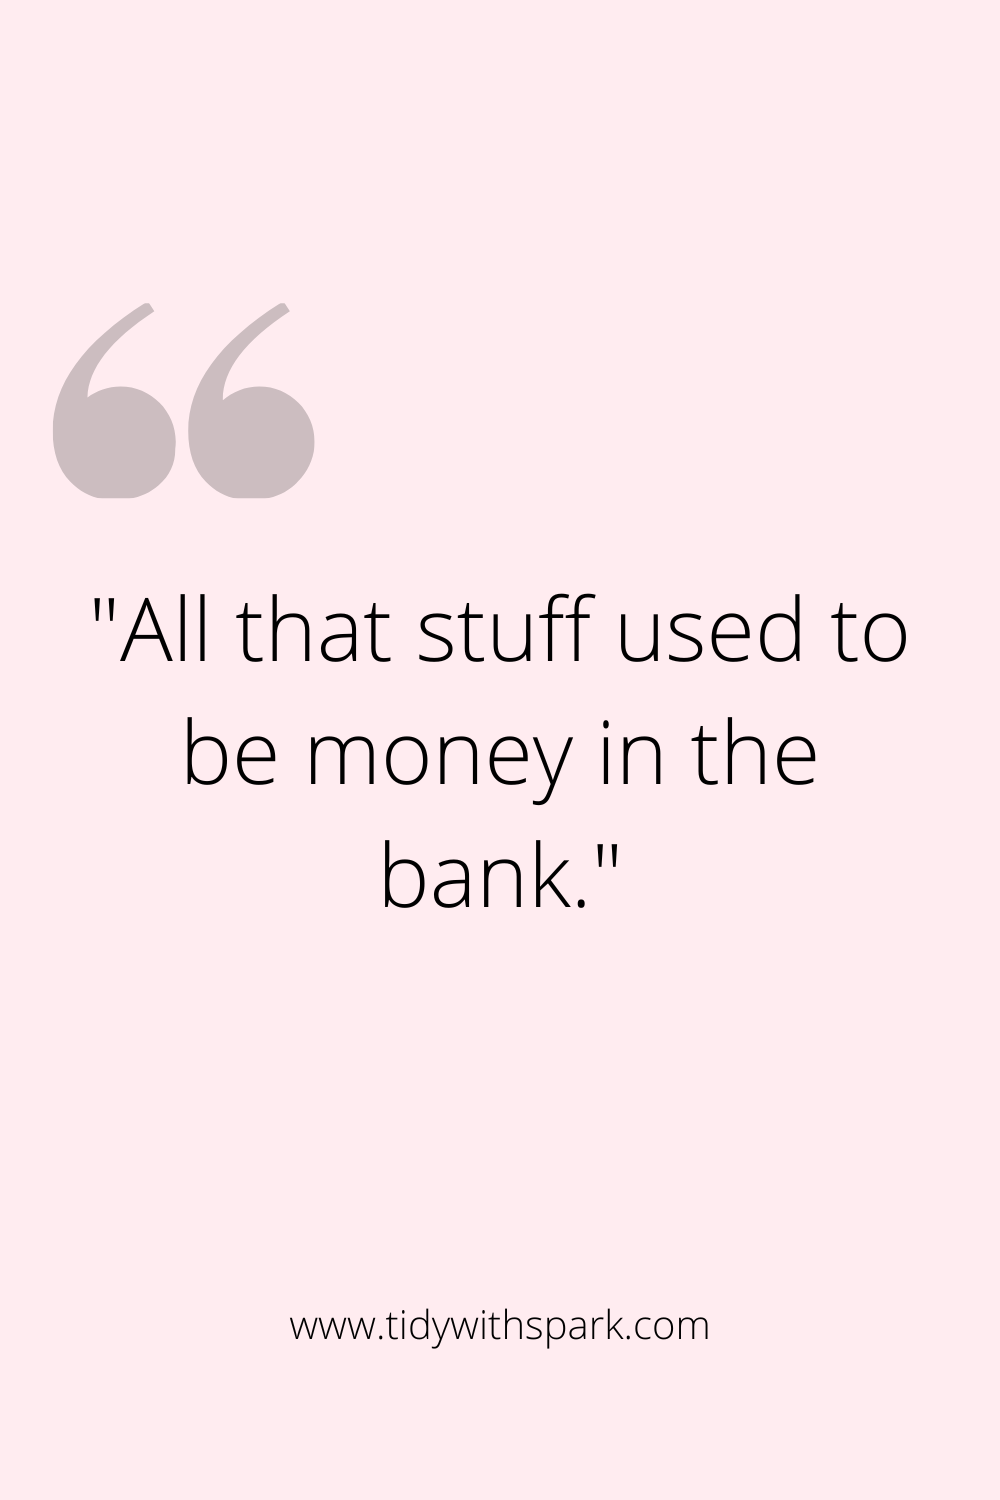 All that stuff used to be money in the bank quote graphic - tidywithspark